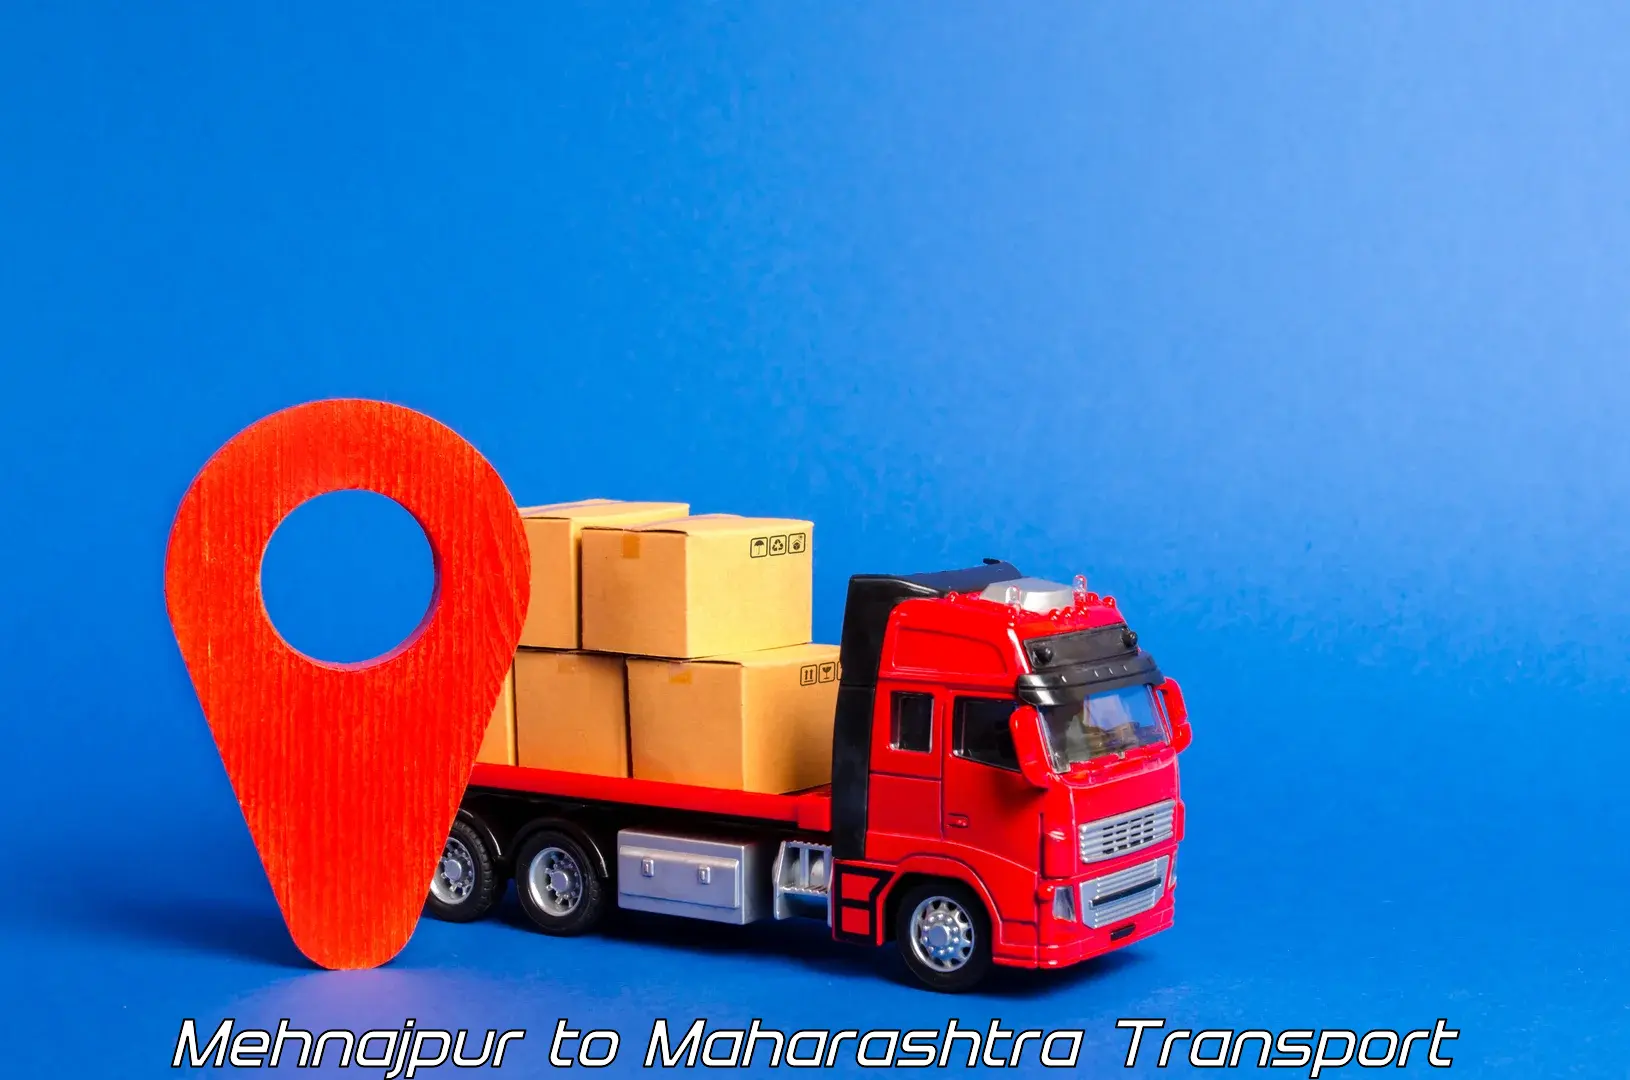 Best transport services in India Mehnajpur to Raigarh Maharashtra